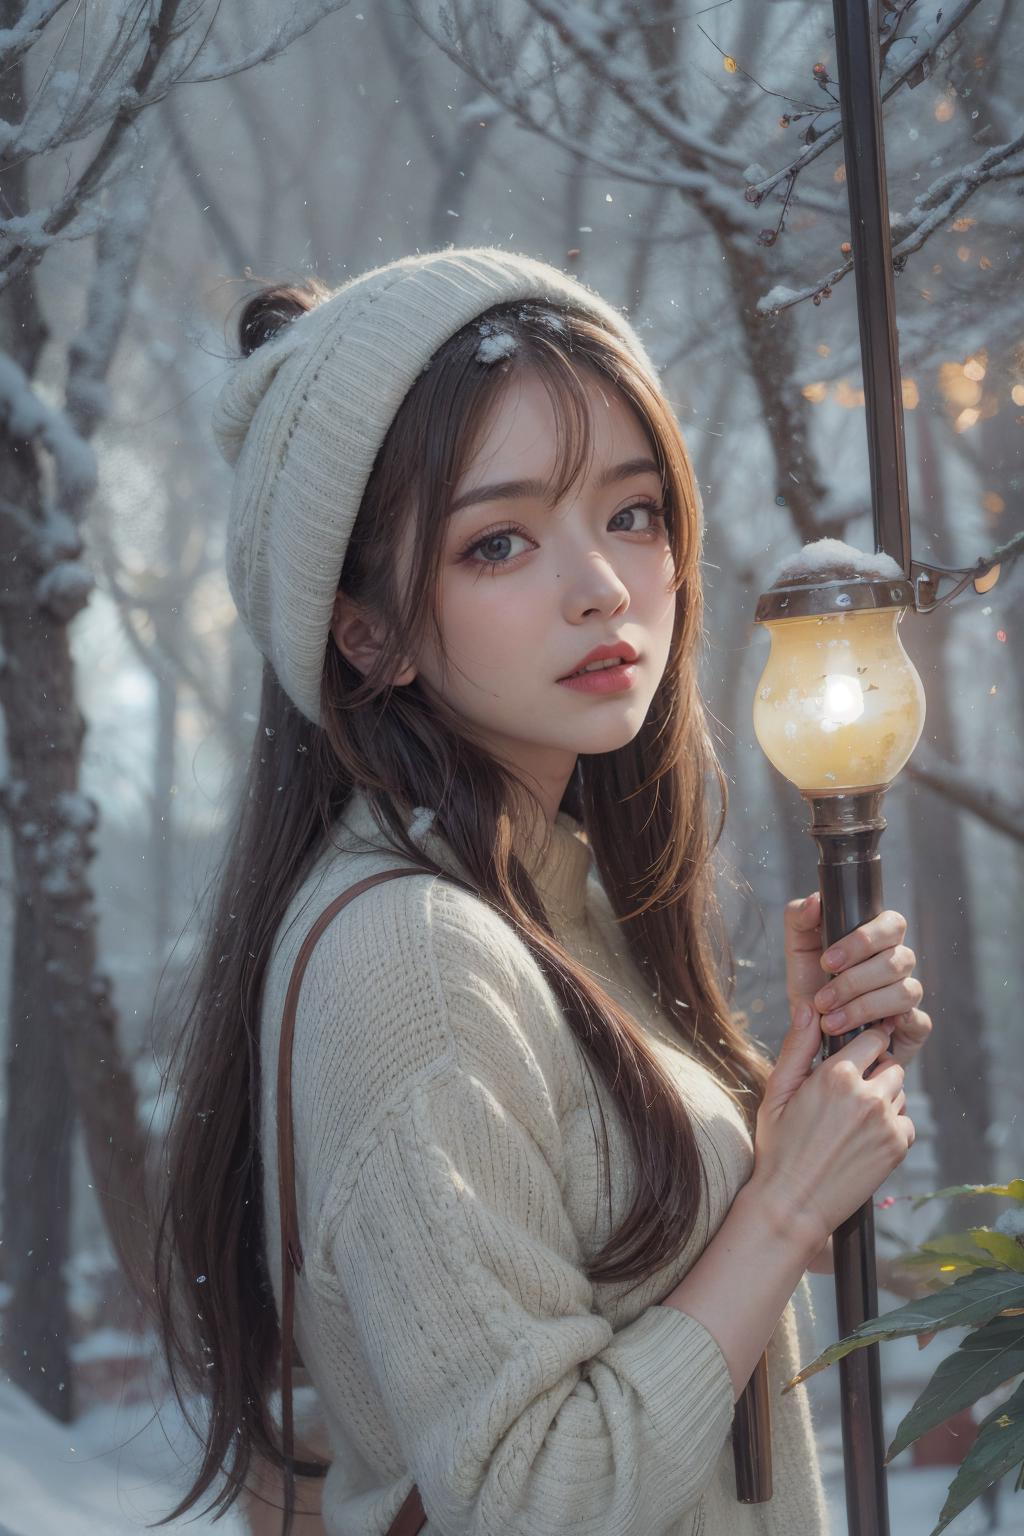 A woman in a knit winter sweater and hat holding a light.